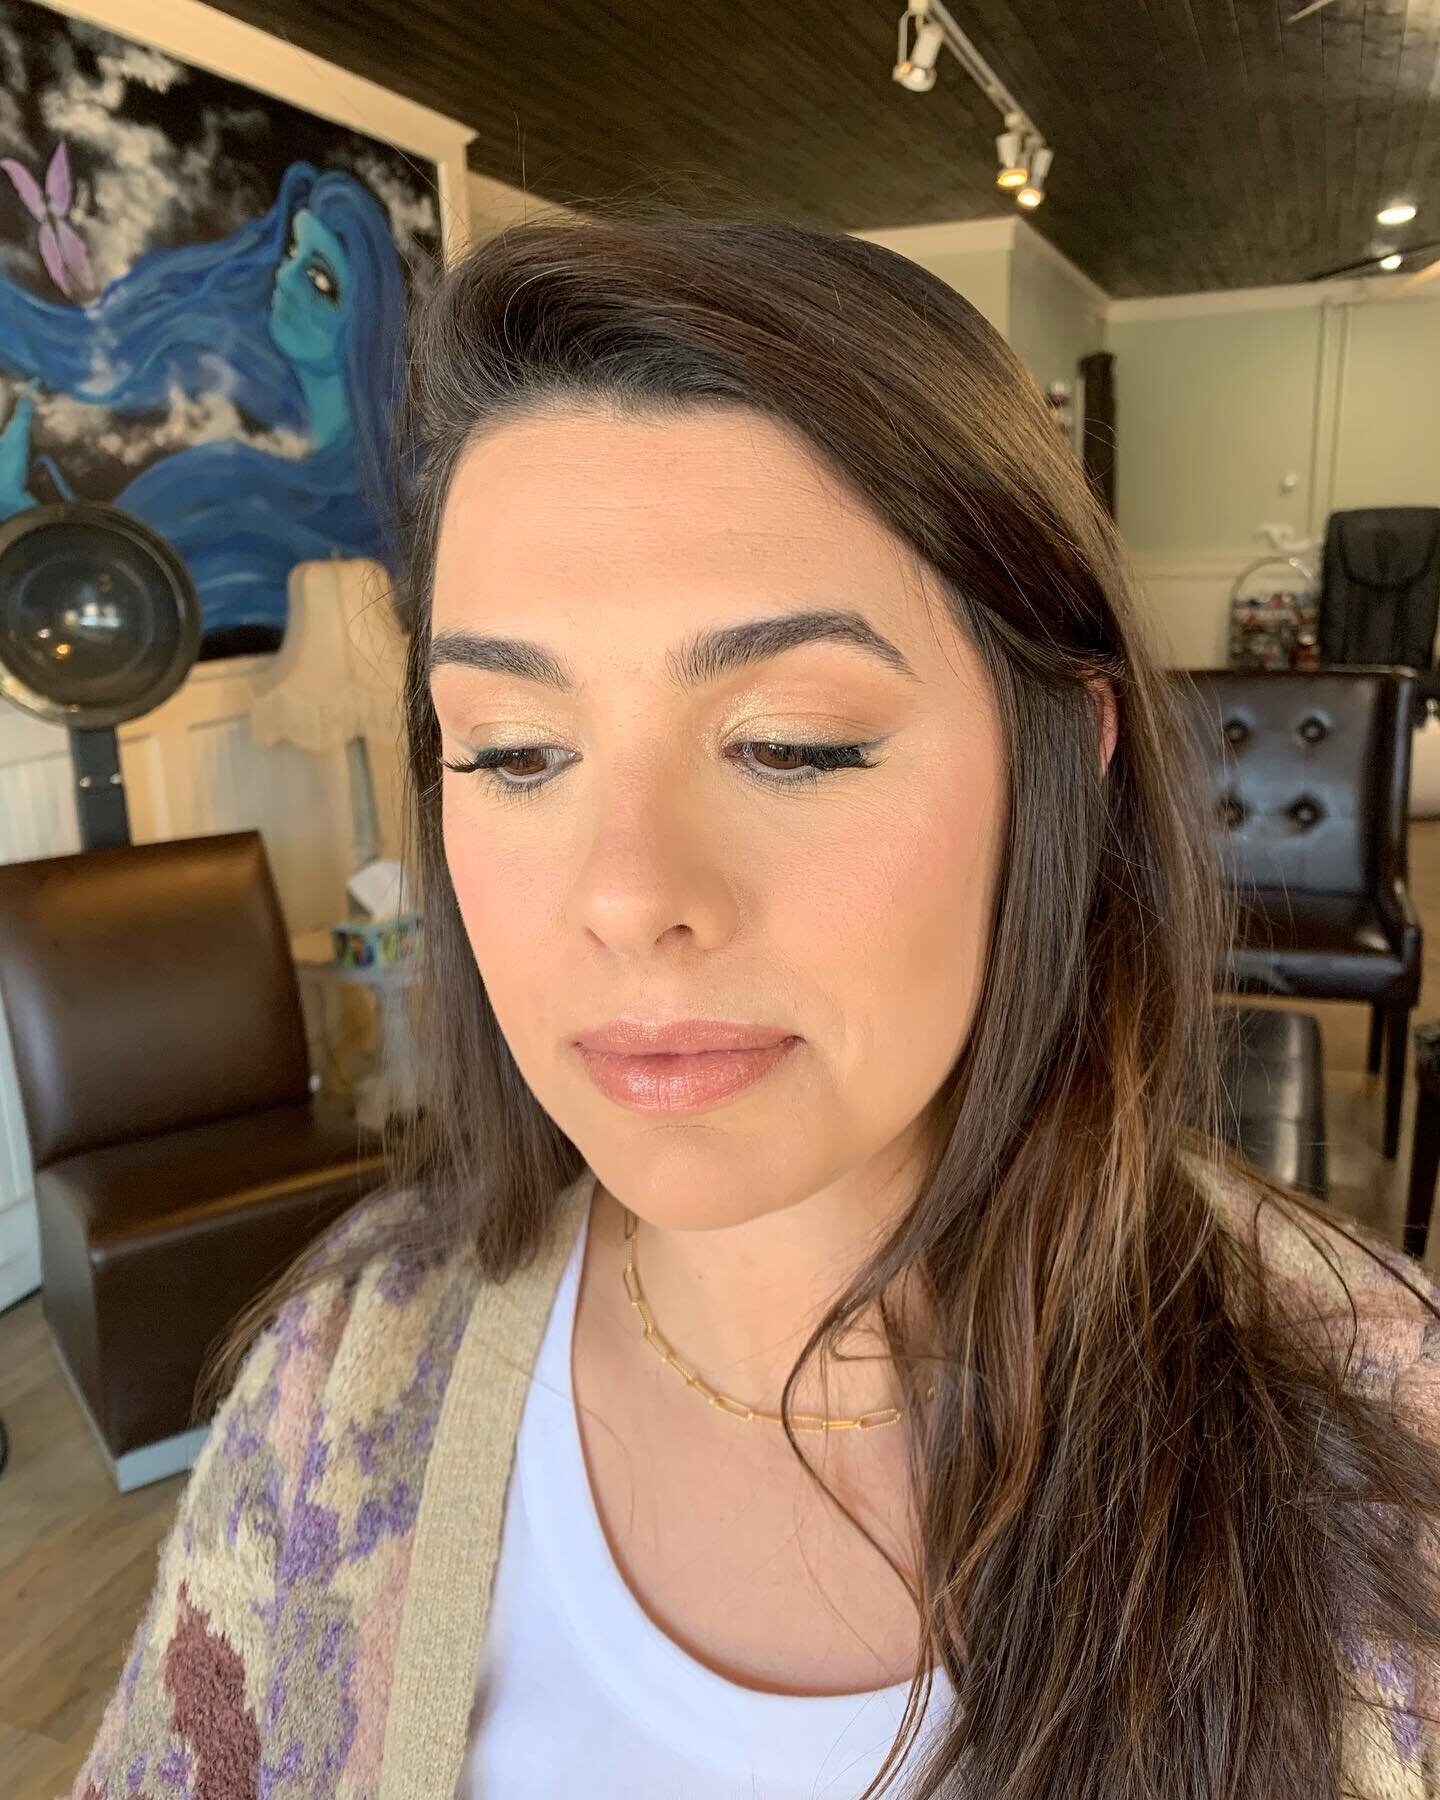 Hair and makeup trials are a great way to see your wedding day vision come to life! 

For appointments, please email: sincerelysomethingborrowed@gmail.com

Makeup: @sincerelysomethingborrowed 
Venue: @westhamptoncc 

#sincerelysomethingborrowed #sinc